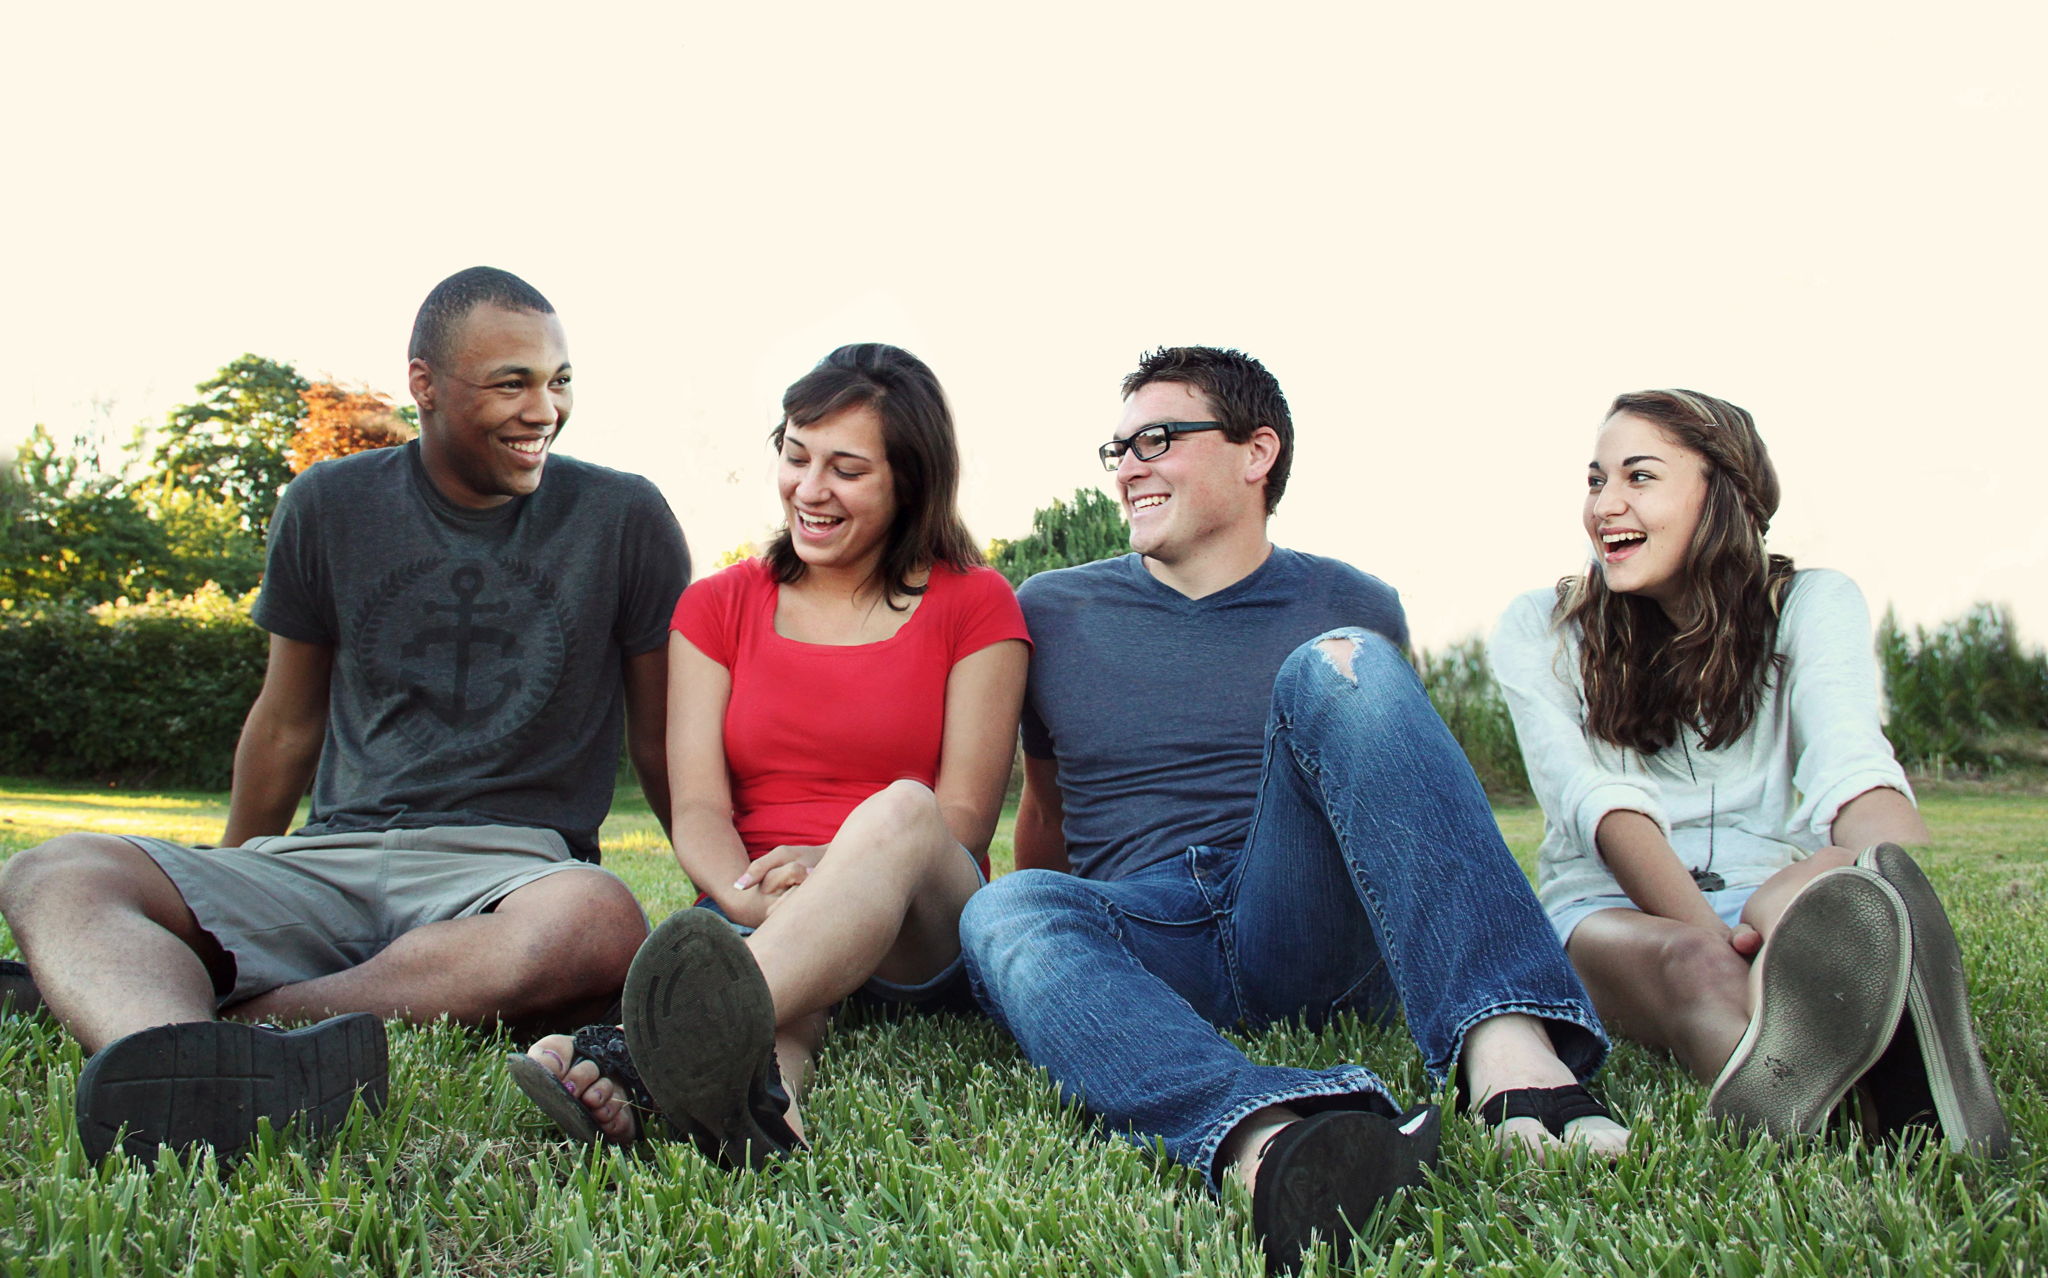 An group of 4 friends of different ethnicities sit together in the grass laughing together.